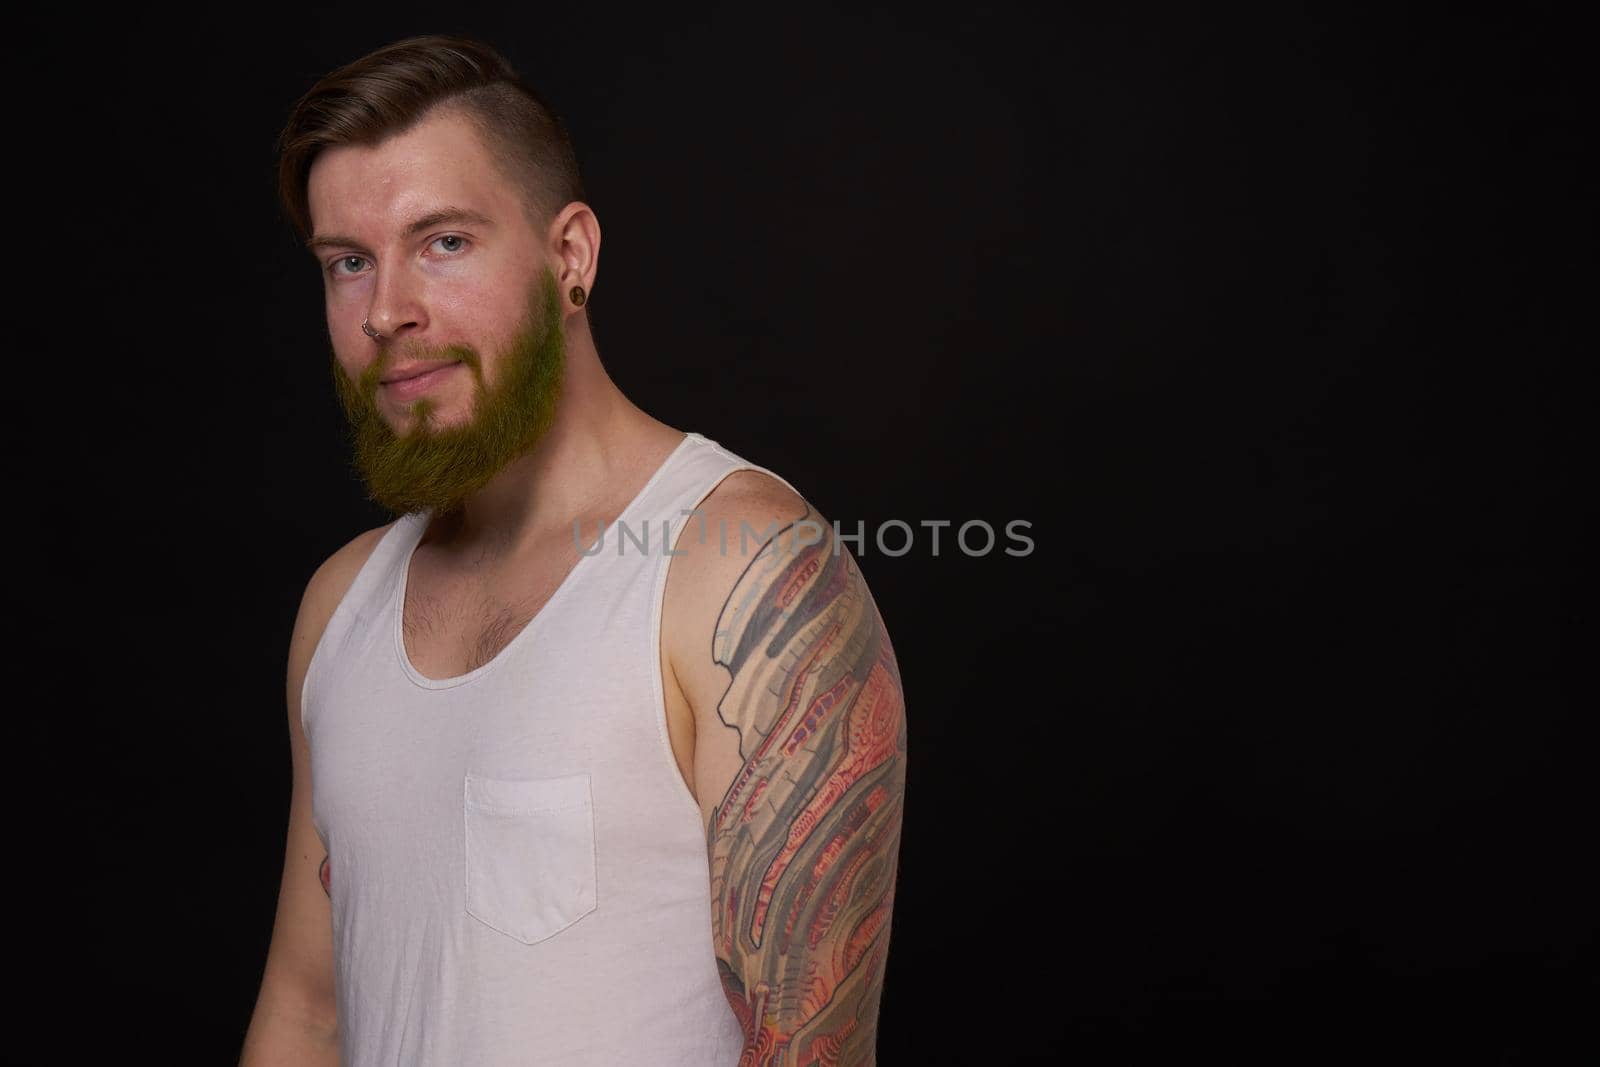 bearded man with tattoos on his arms gesturing with his hands dark background by Vichizh